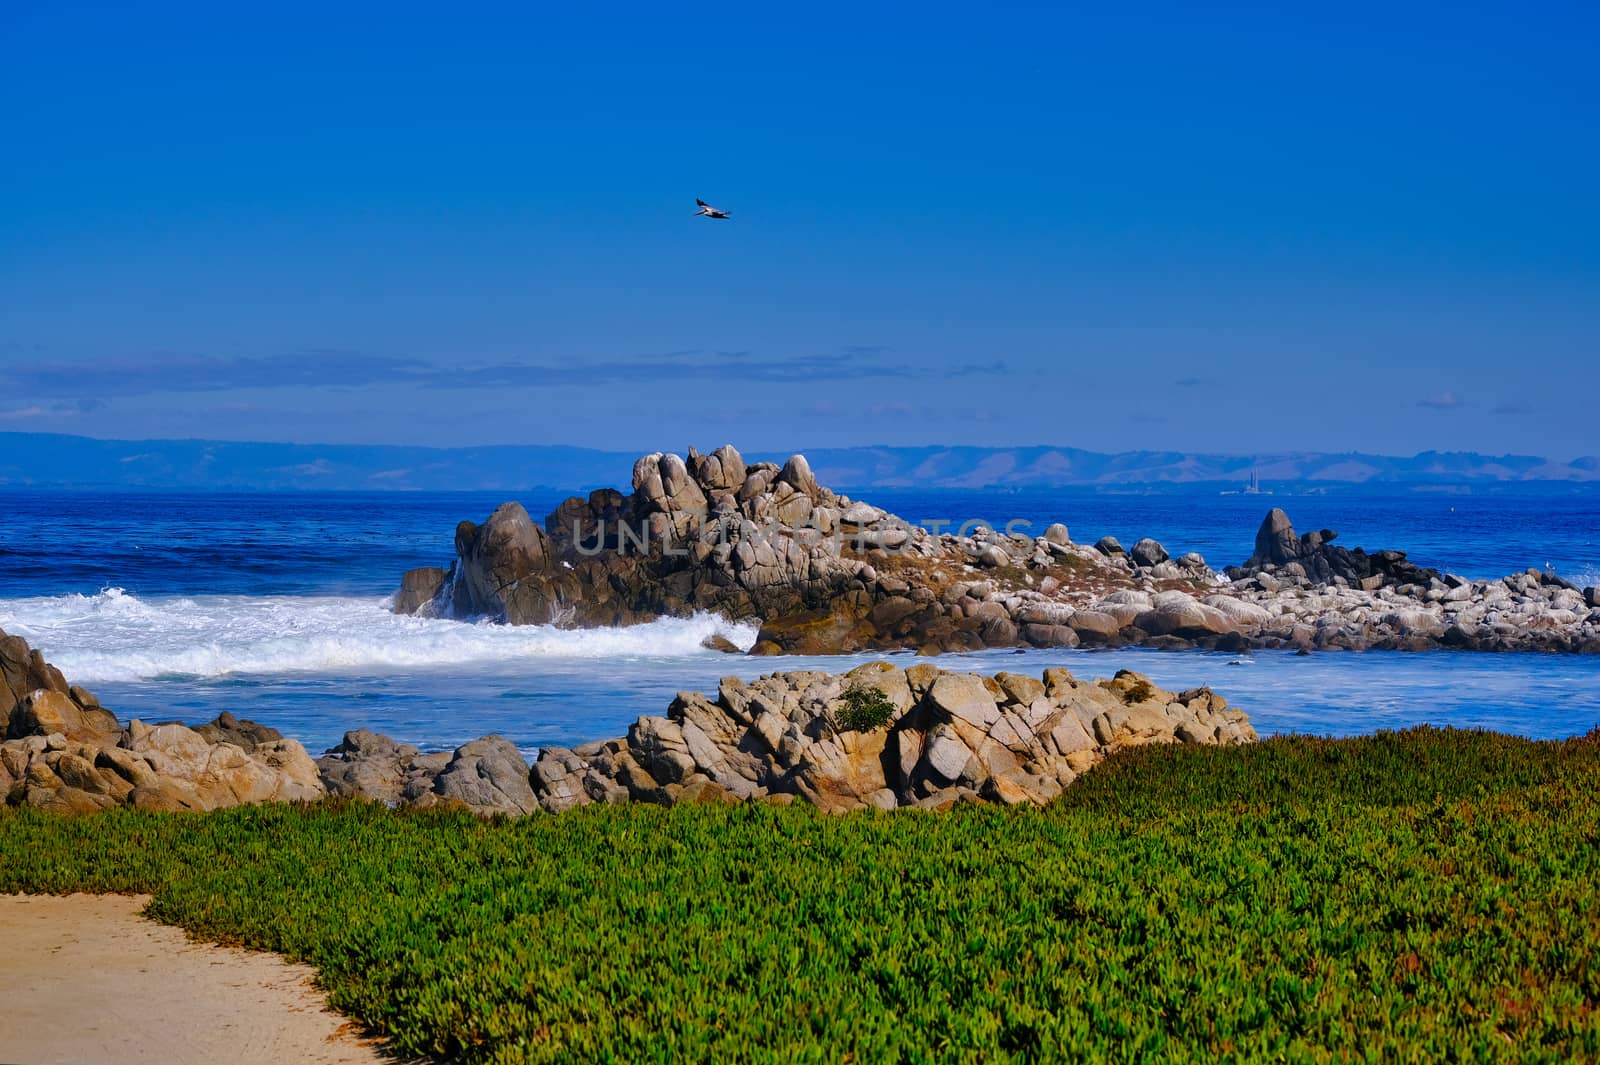 Green Ground Cover on Pacific Grove Beach with Crashing Surf